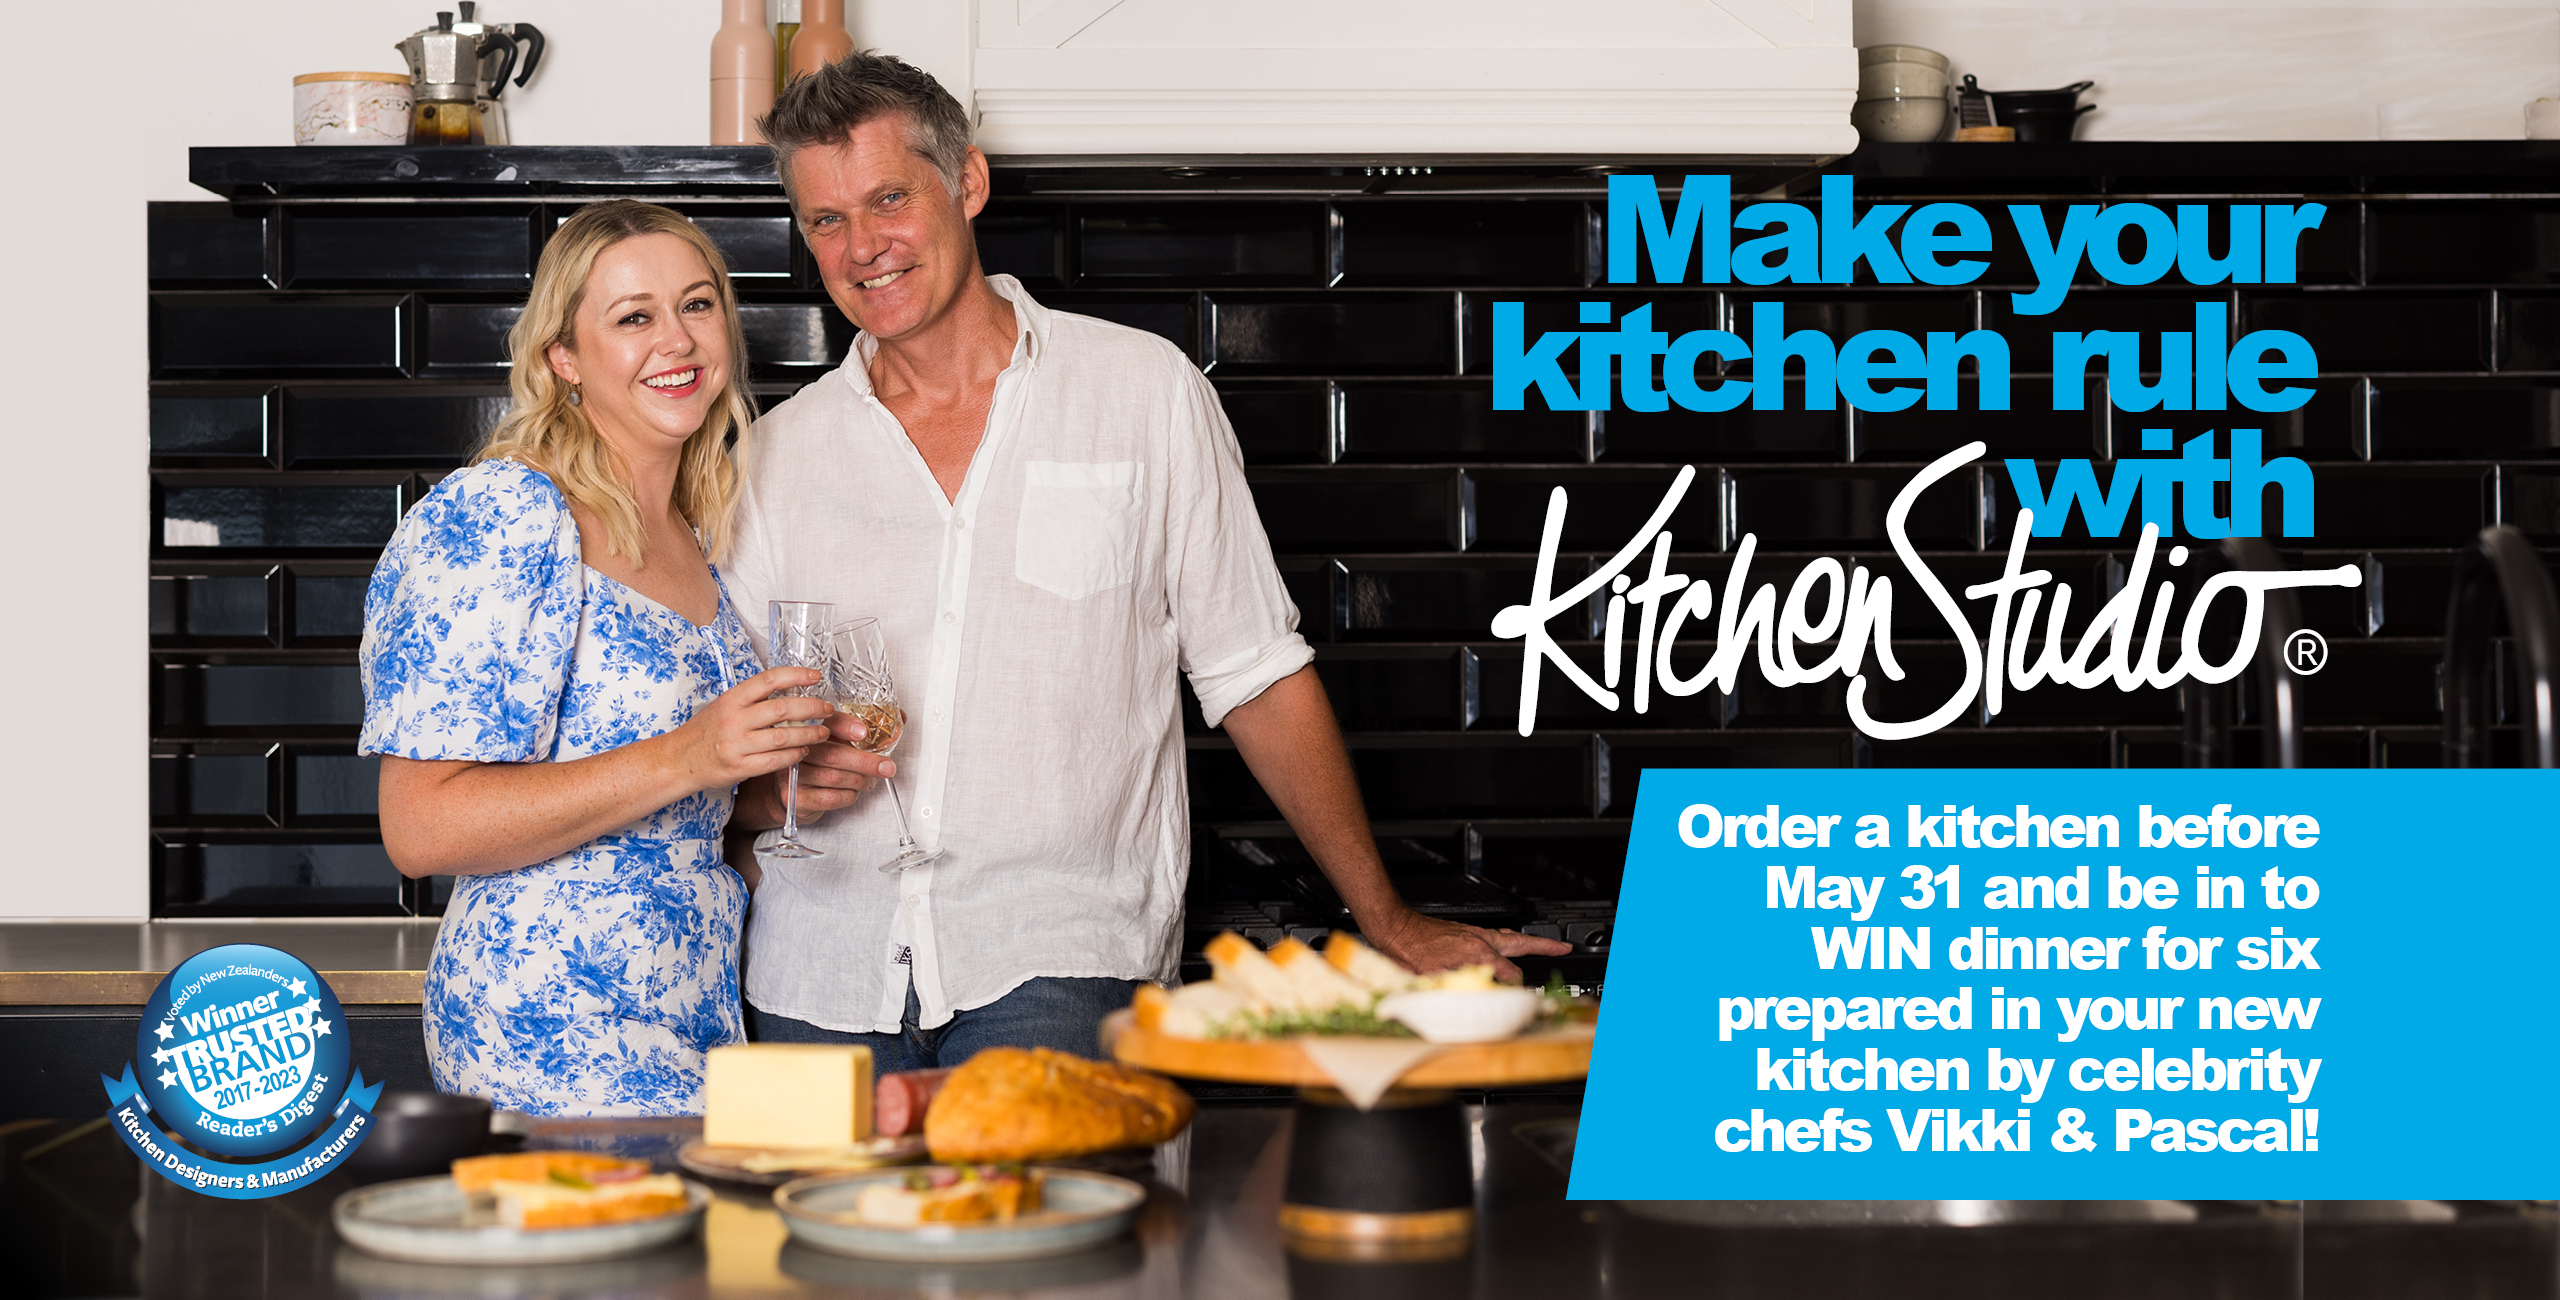 Make your kitchen rule with Kitchen Studio